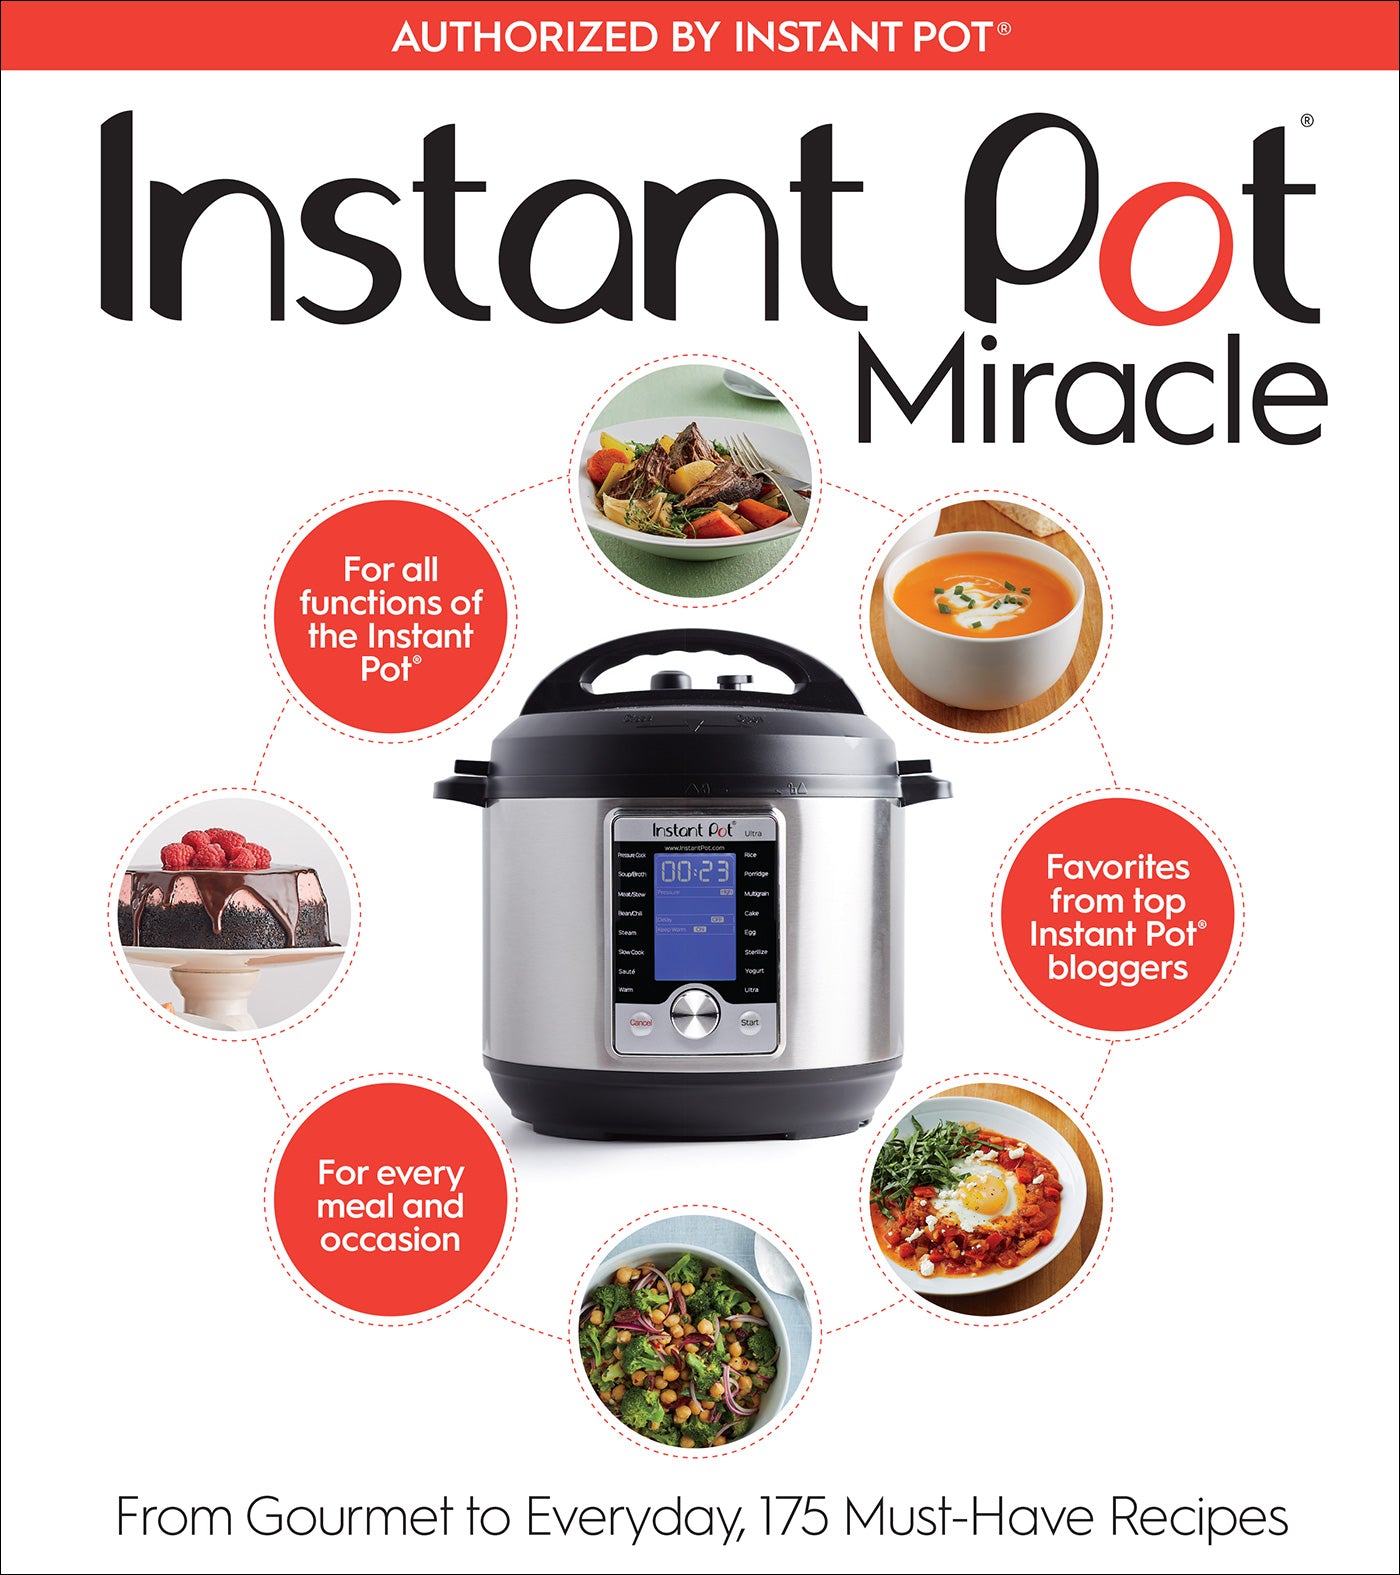 View Instant Pot Miracle by the Editors at Houghton Mifflin Harcourt